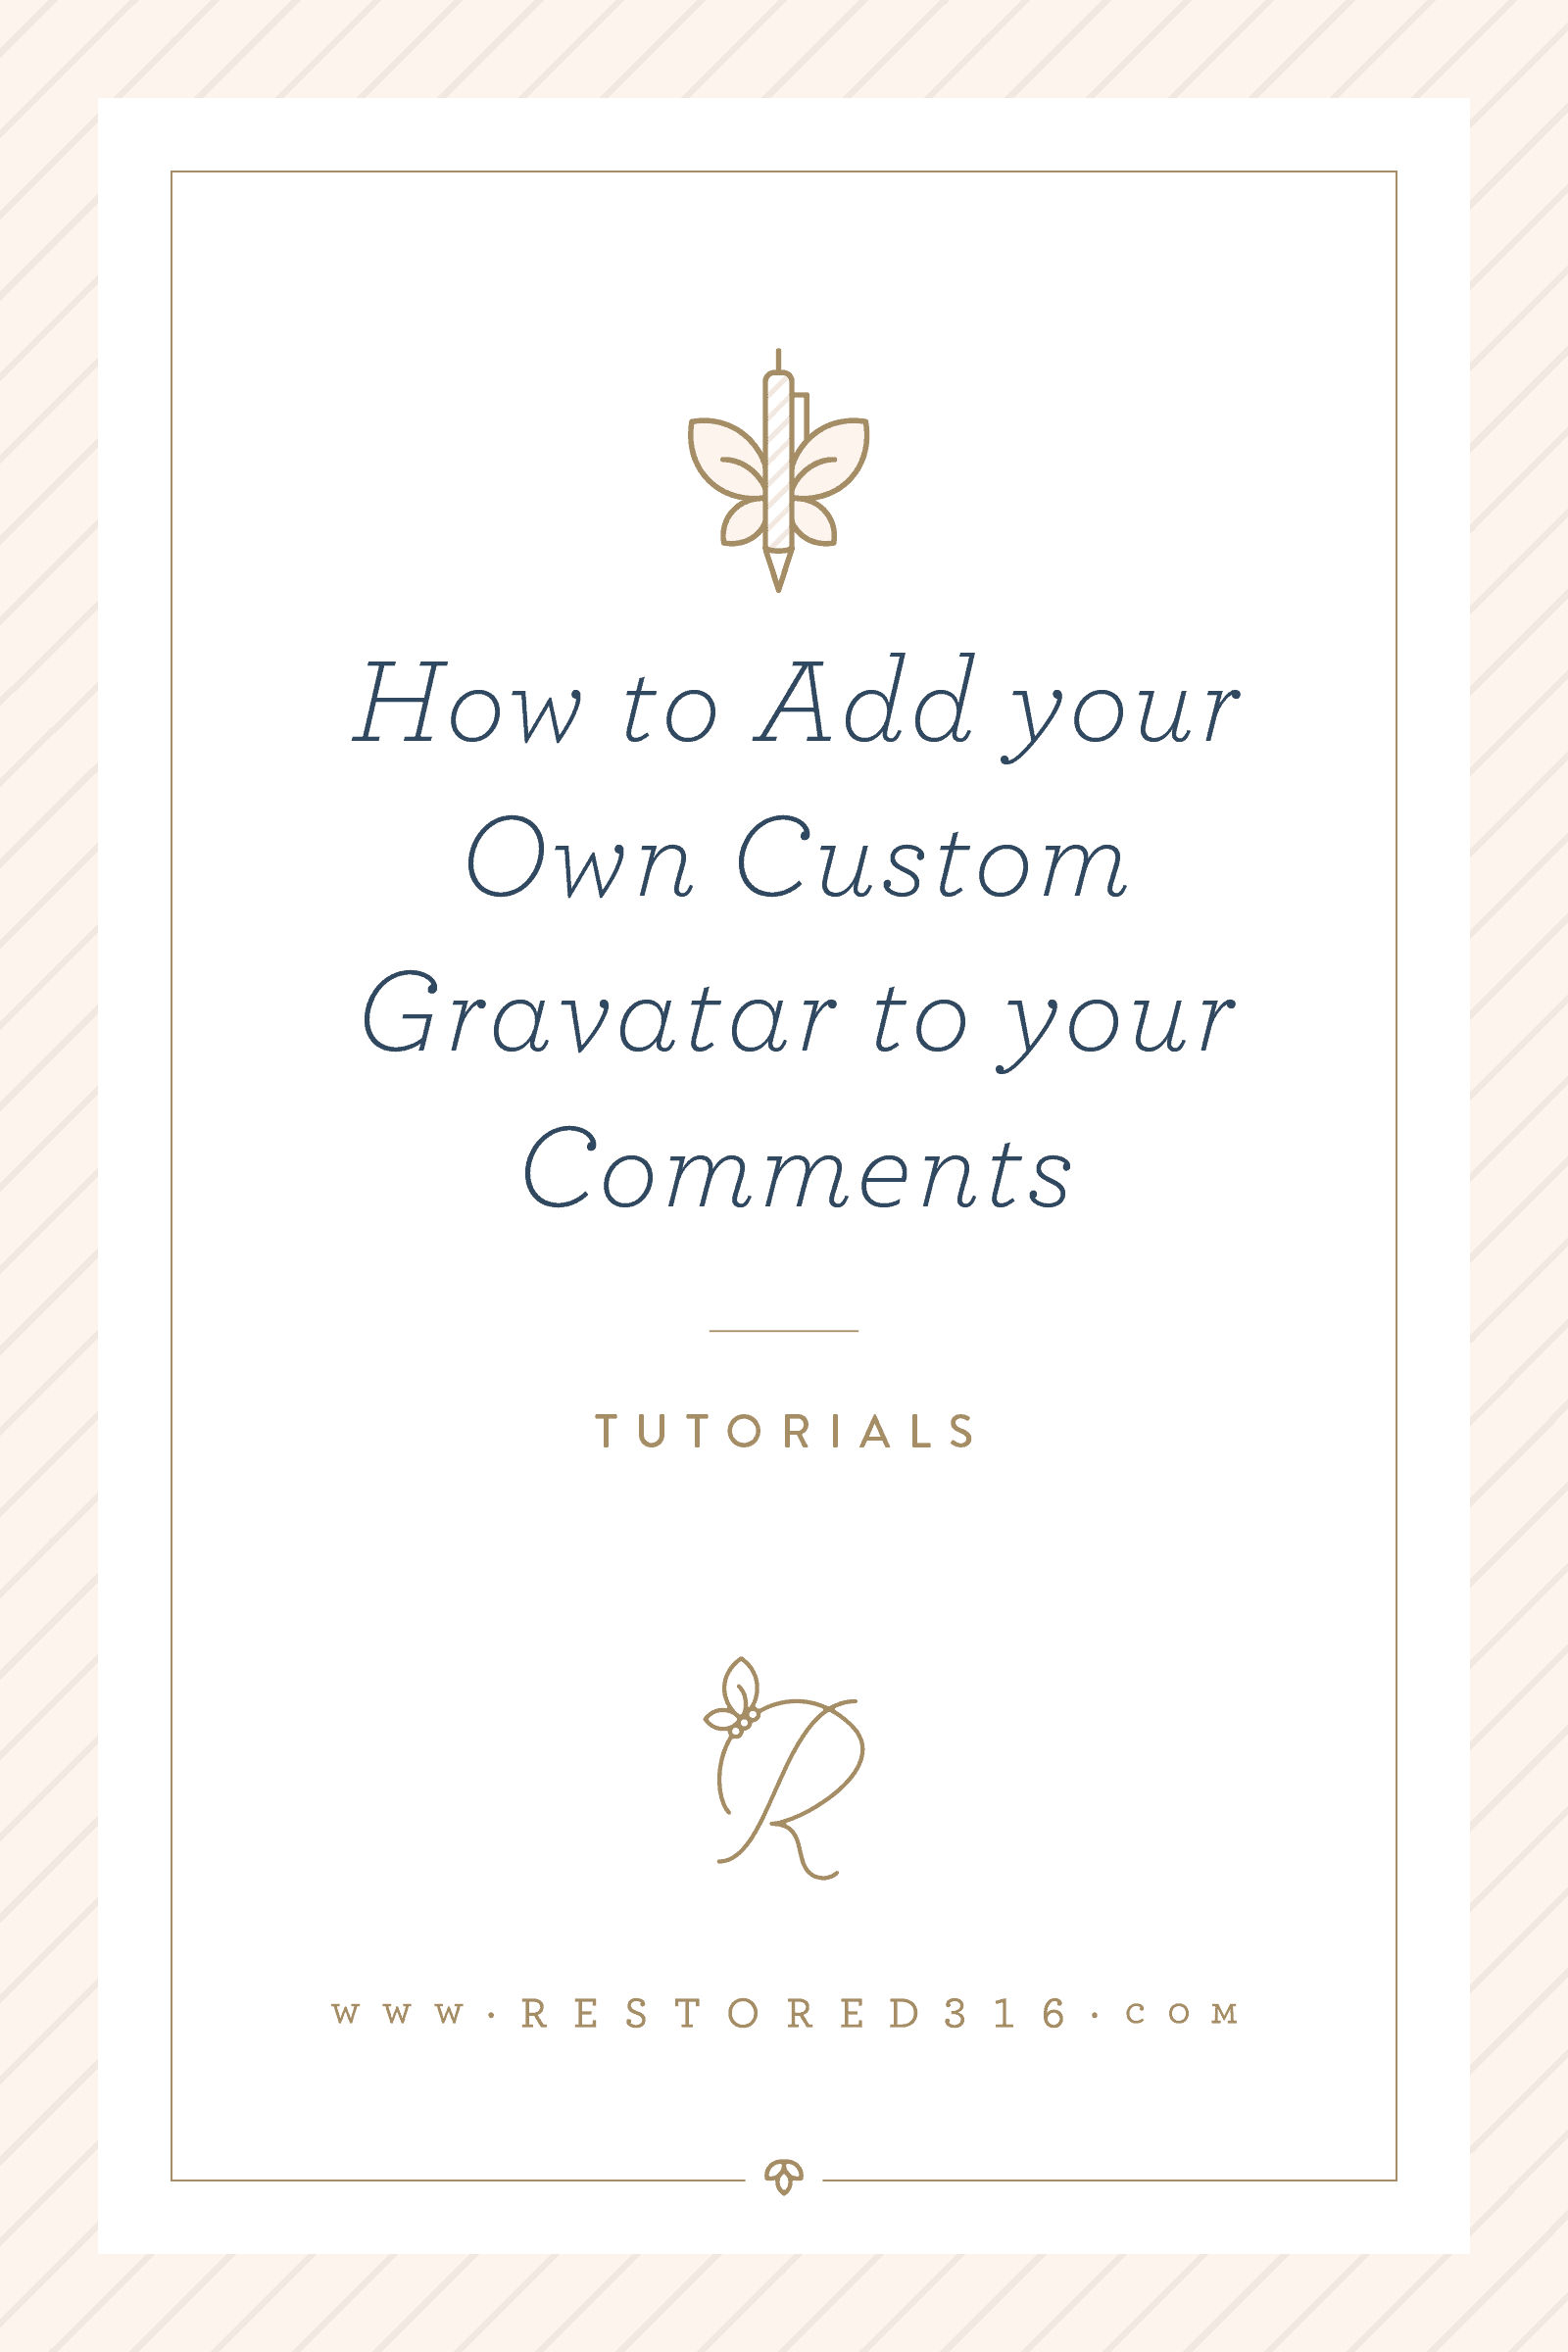 How to Add Your Own Custom Gravatar to Your Comments